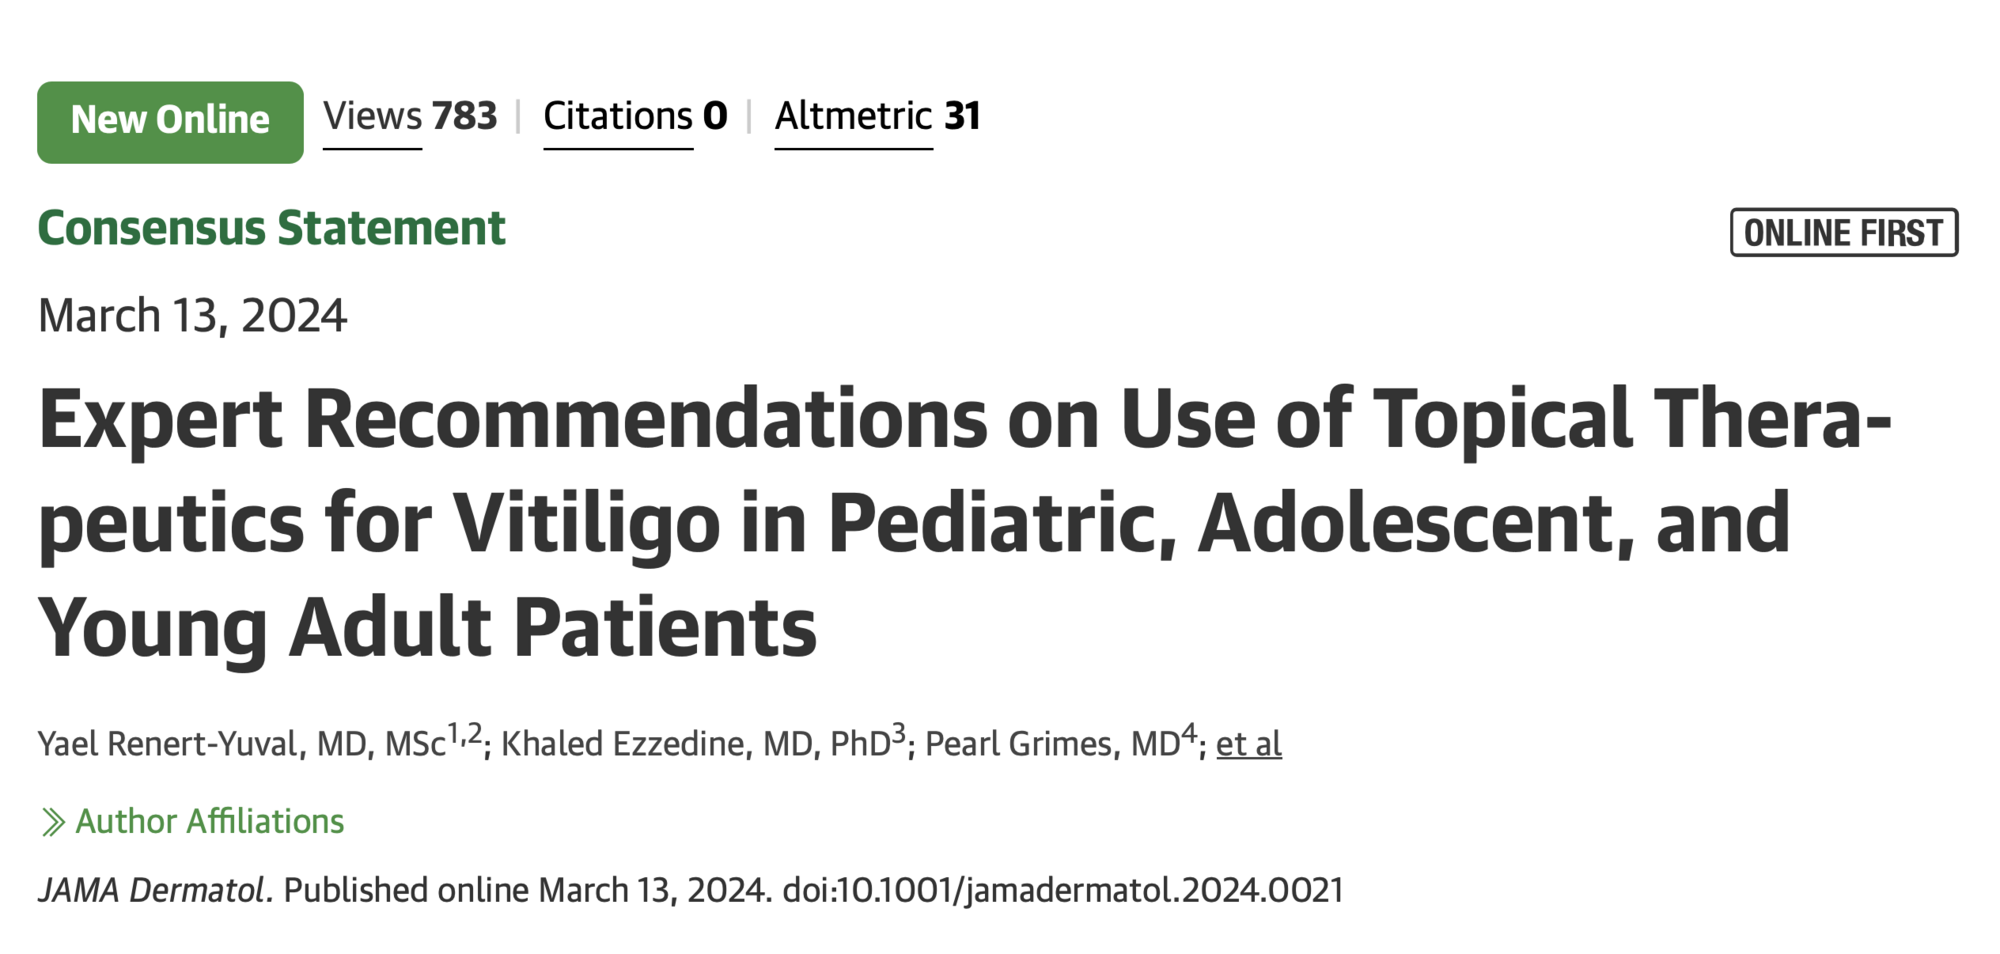 Expert Recommendations on Use of Topical Therapeutics for Vitiligo in Pediatric, Adolescent, and Young Adult Patients